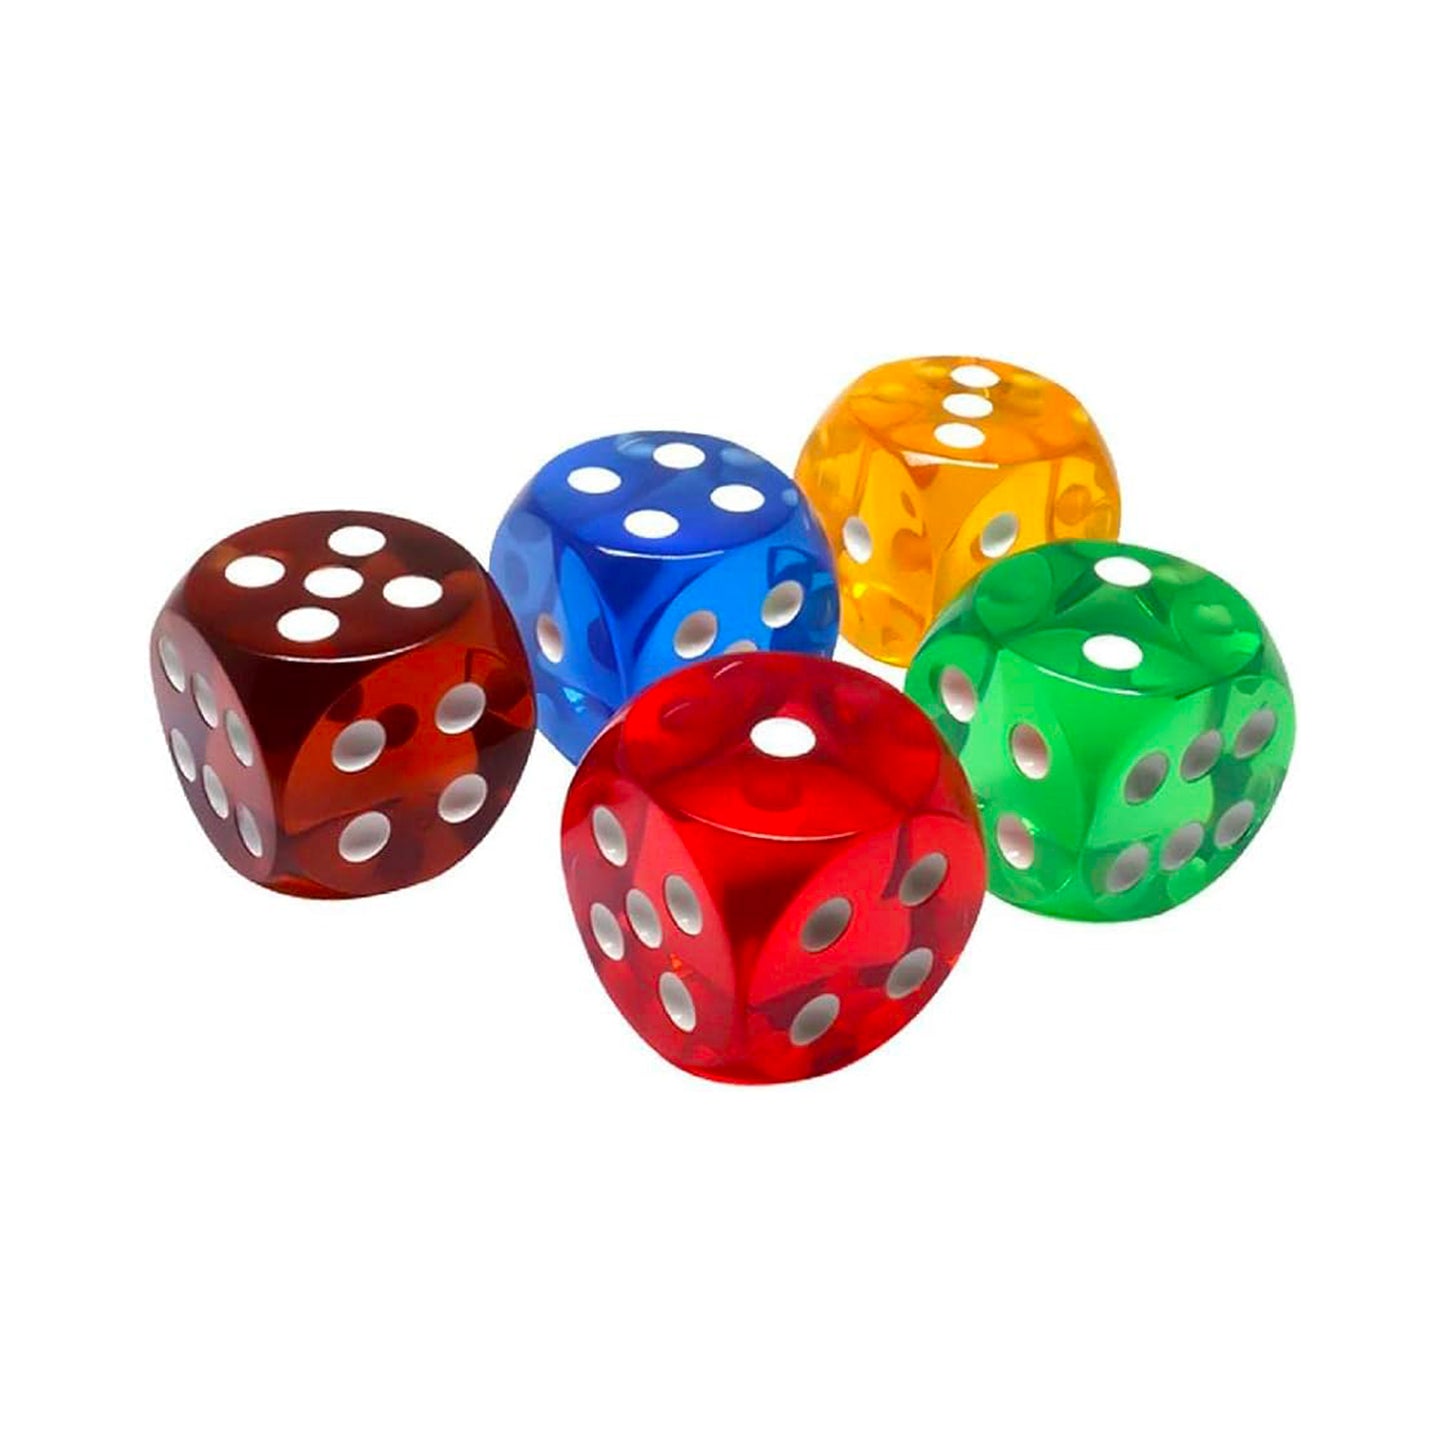 25 mm Large Size Dice - Assorted Colours